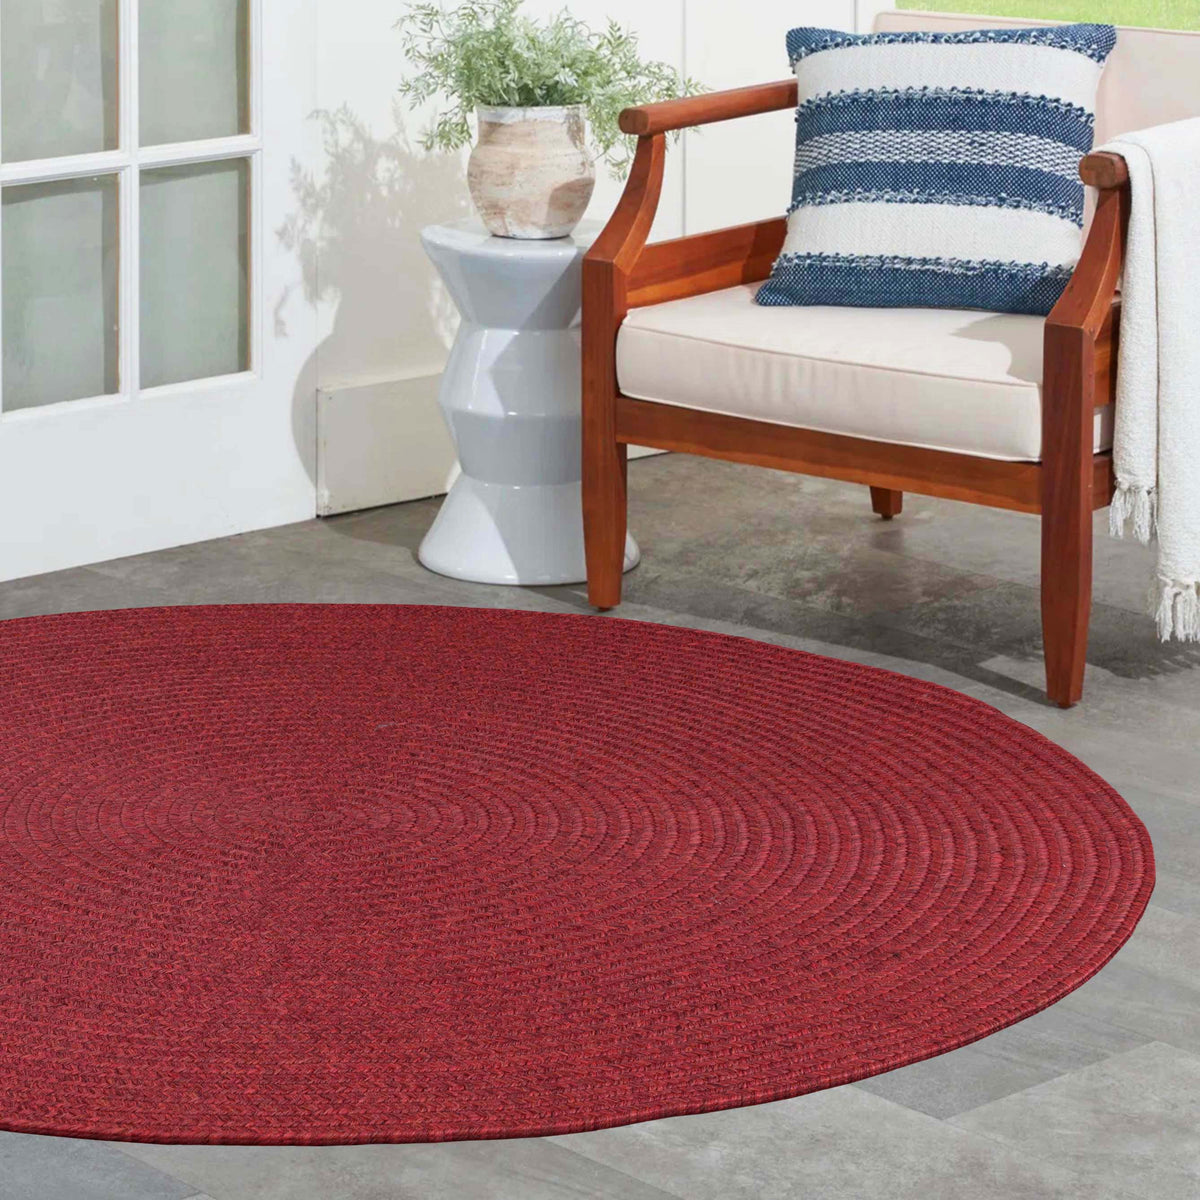 Bohemian Braided Indoor Outdoor Rugs Solid Round Area Rug - Burgundy